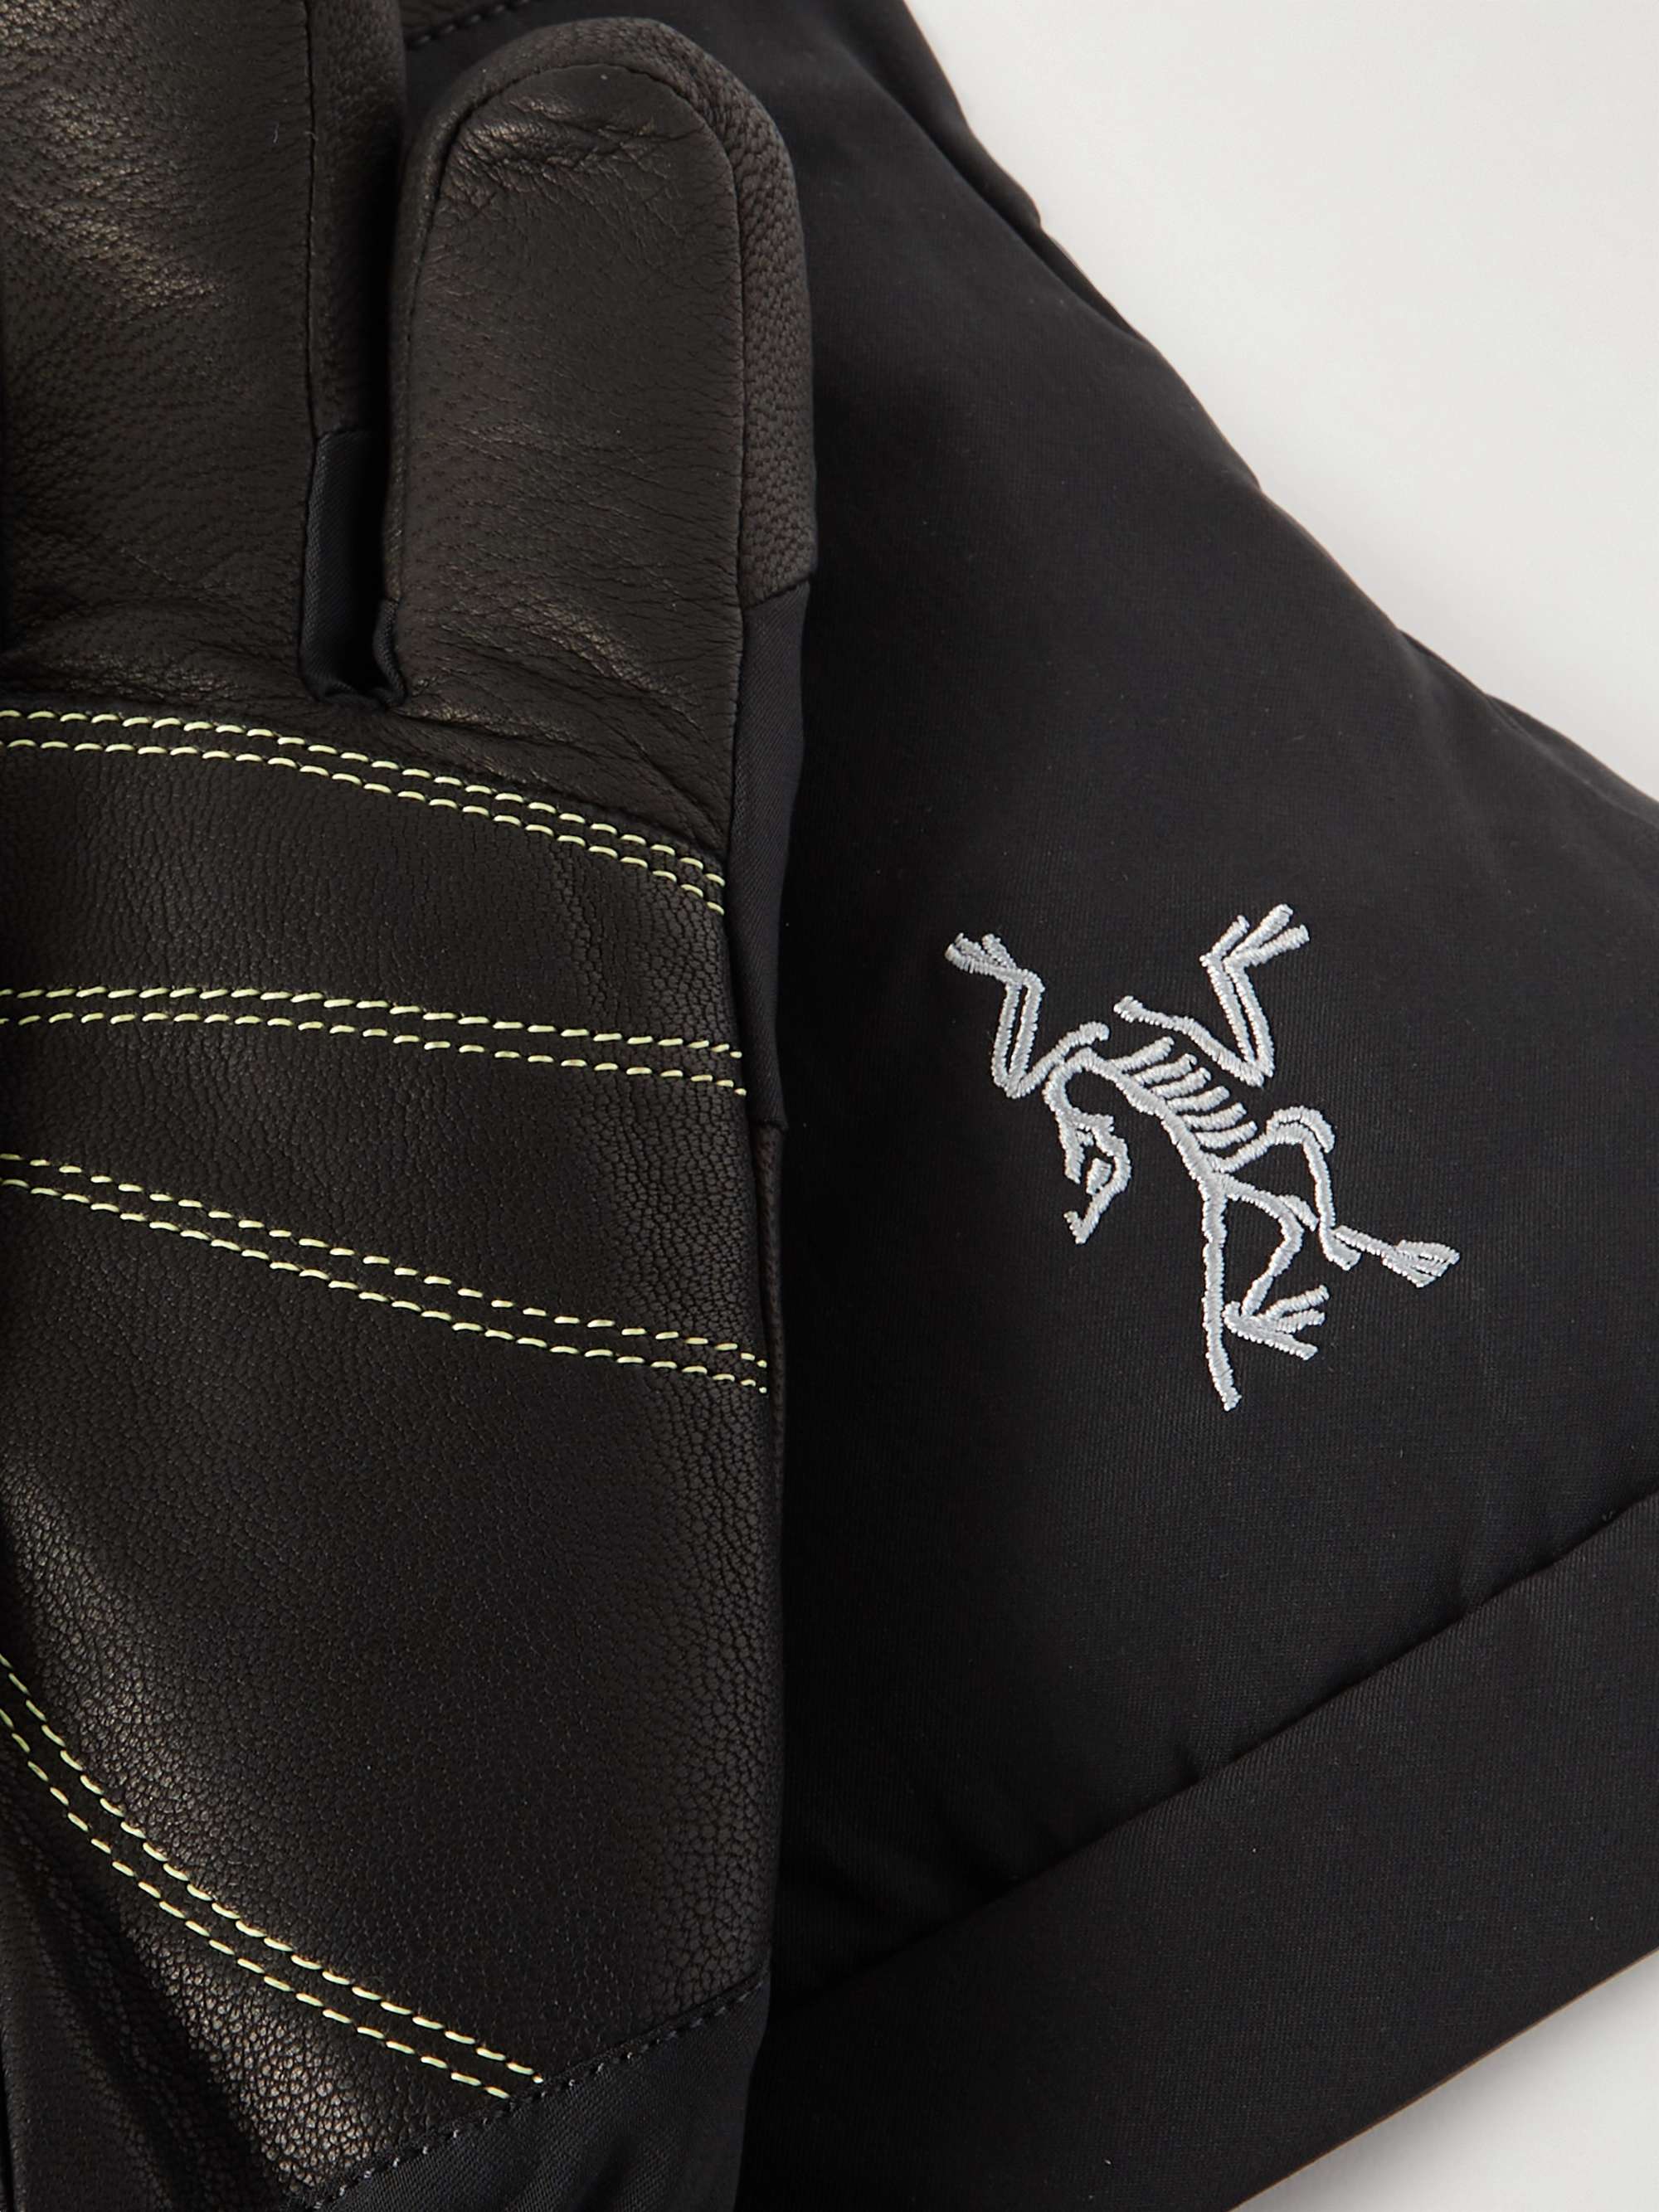 ARC'TERYX Fission SV GORE-TEX and Leather Gloves